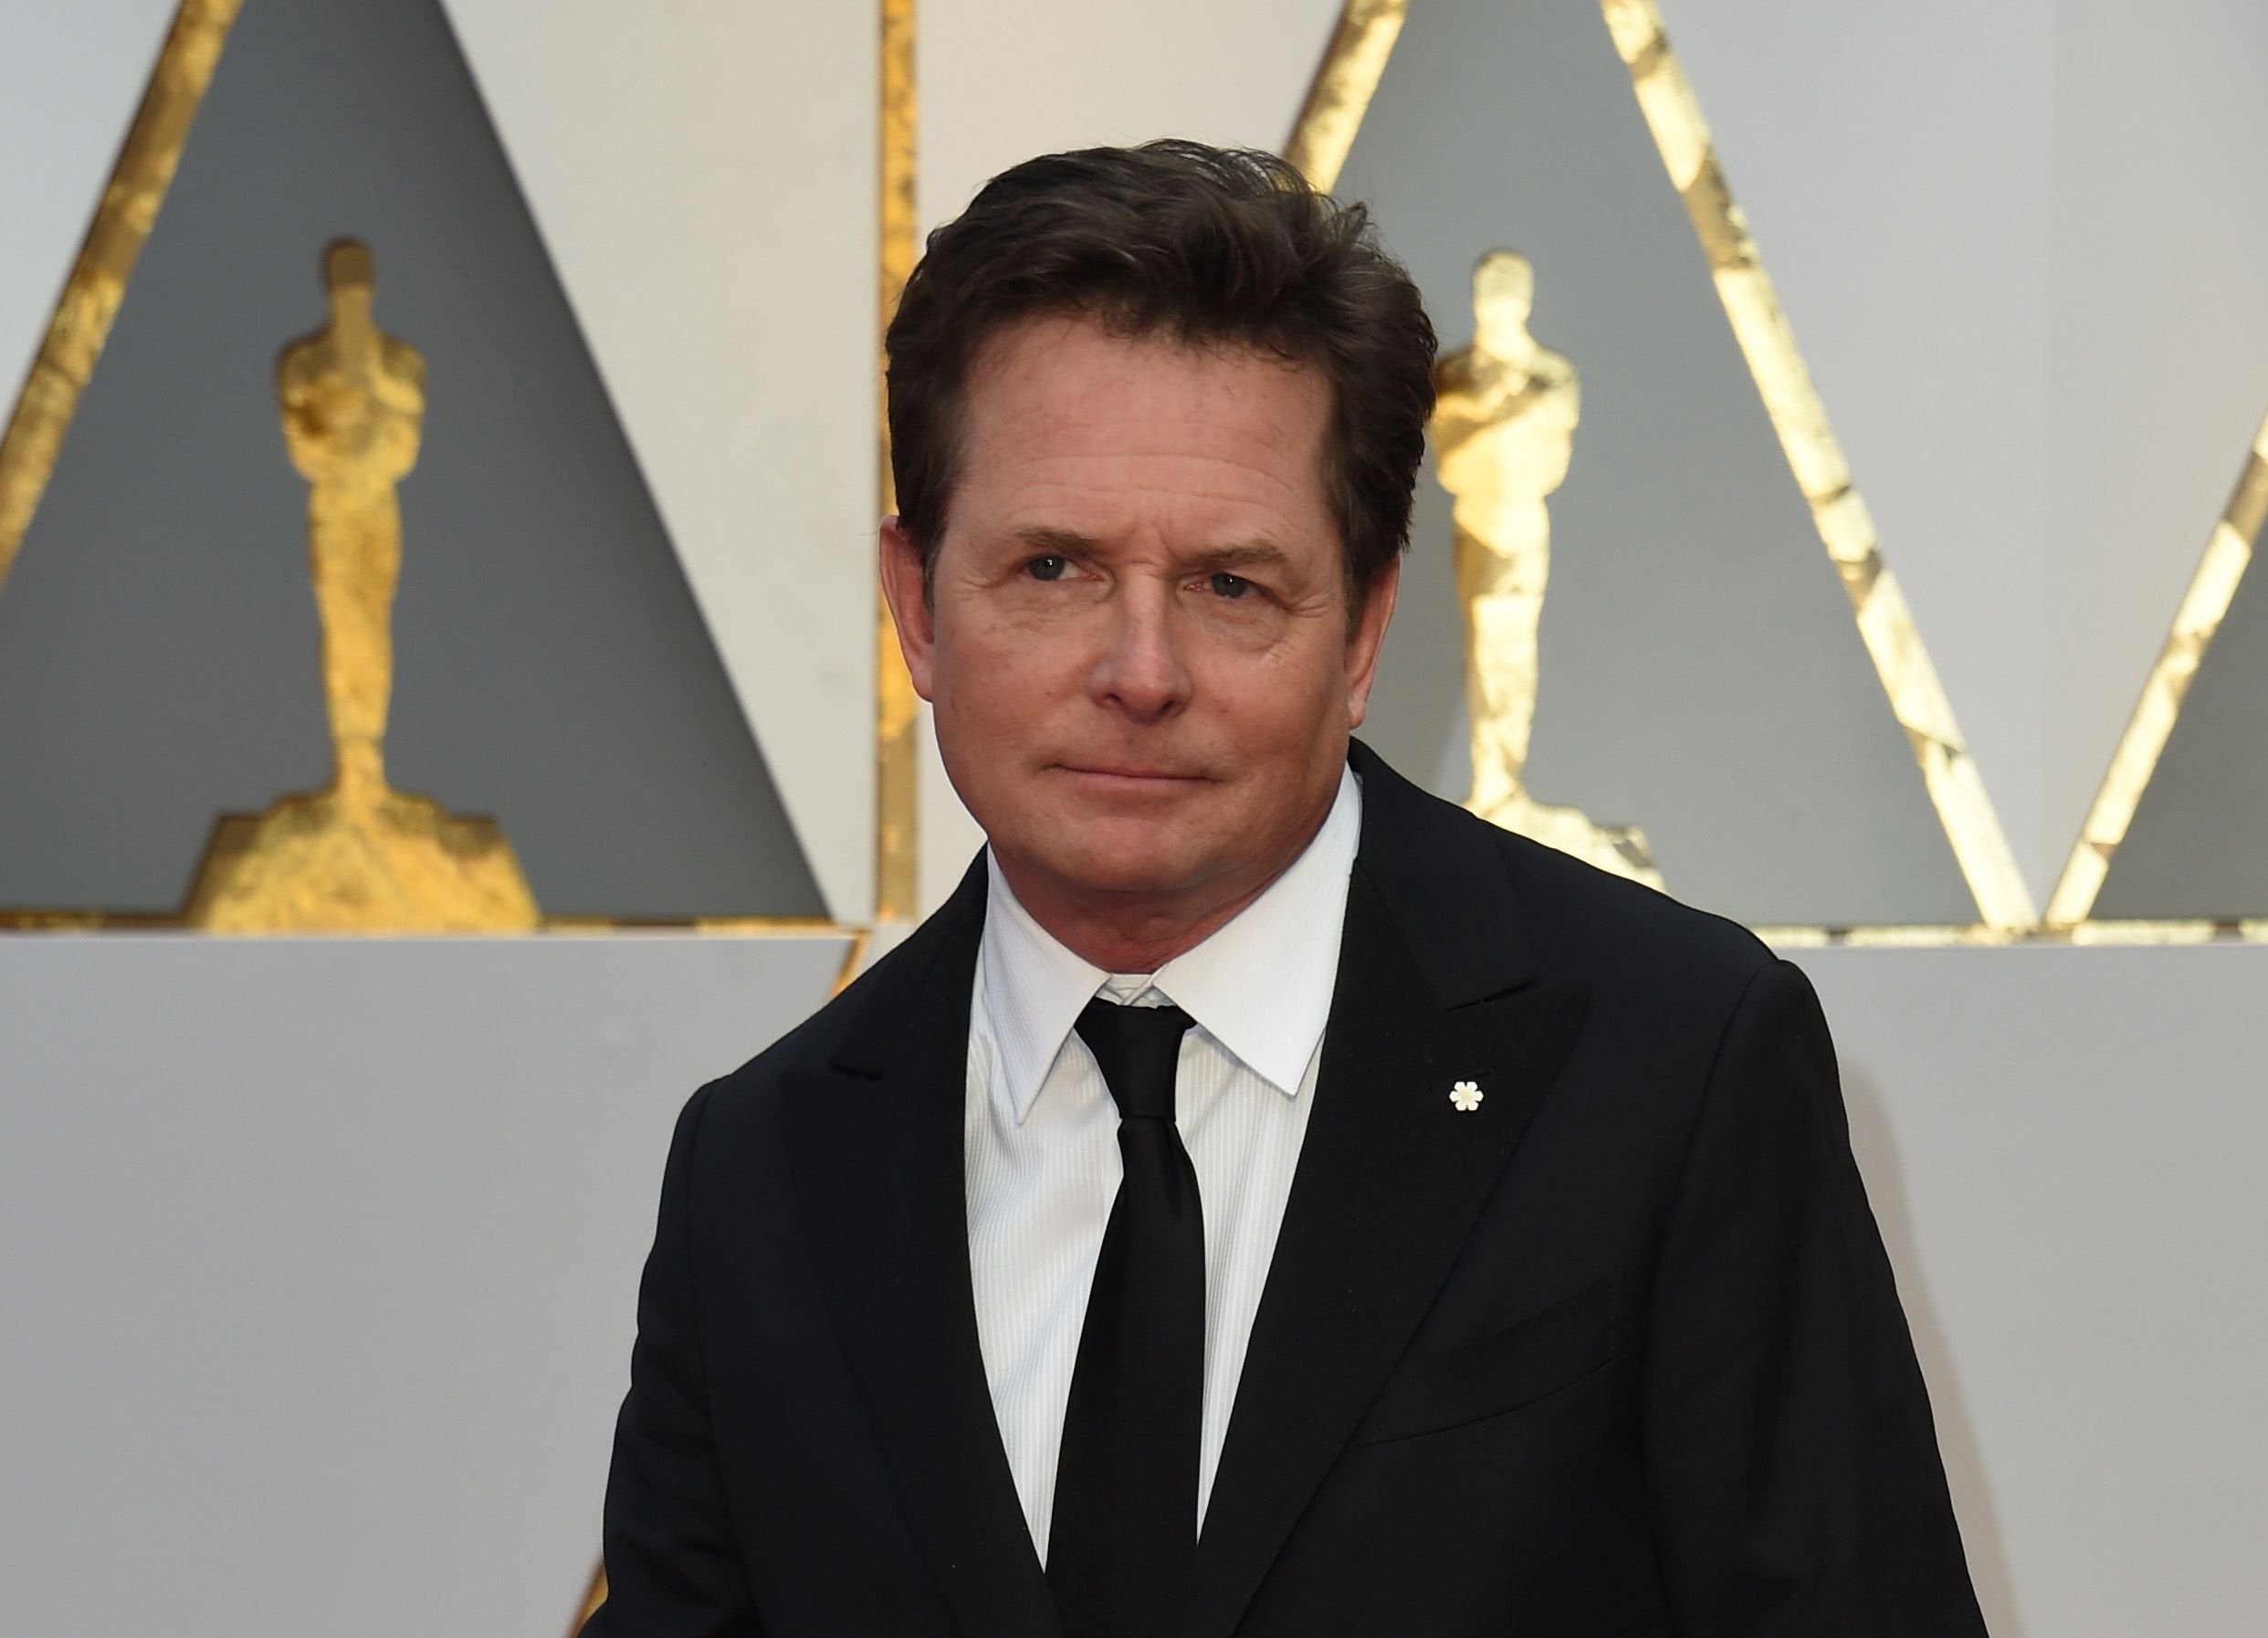 Michael J. Fox arrives on the red carpet for the 89th Oscars on February 26, 2017 in Hollywood, California. | Photo: Getty Images